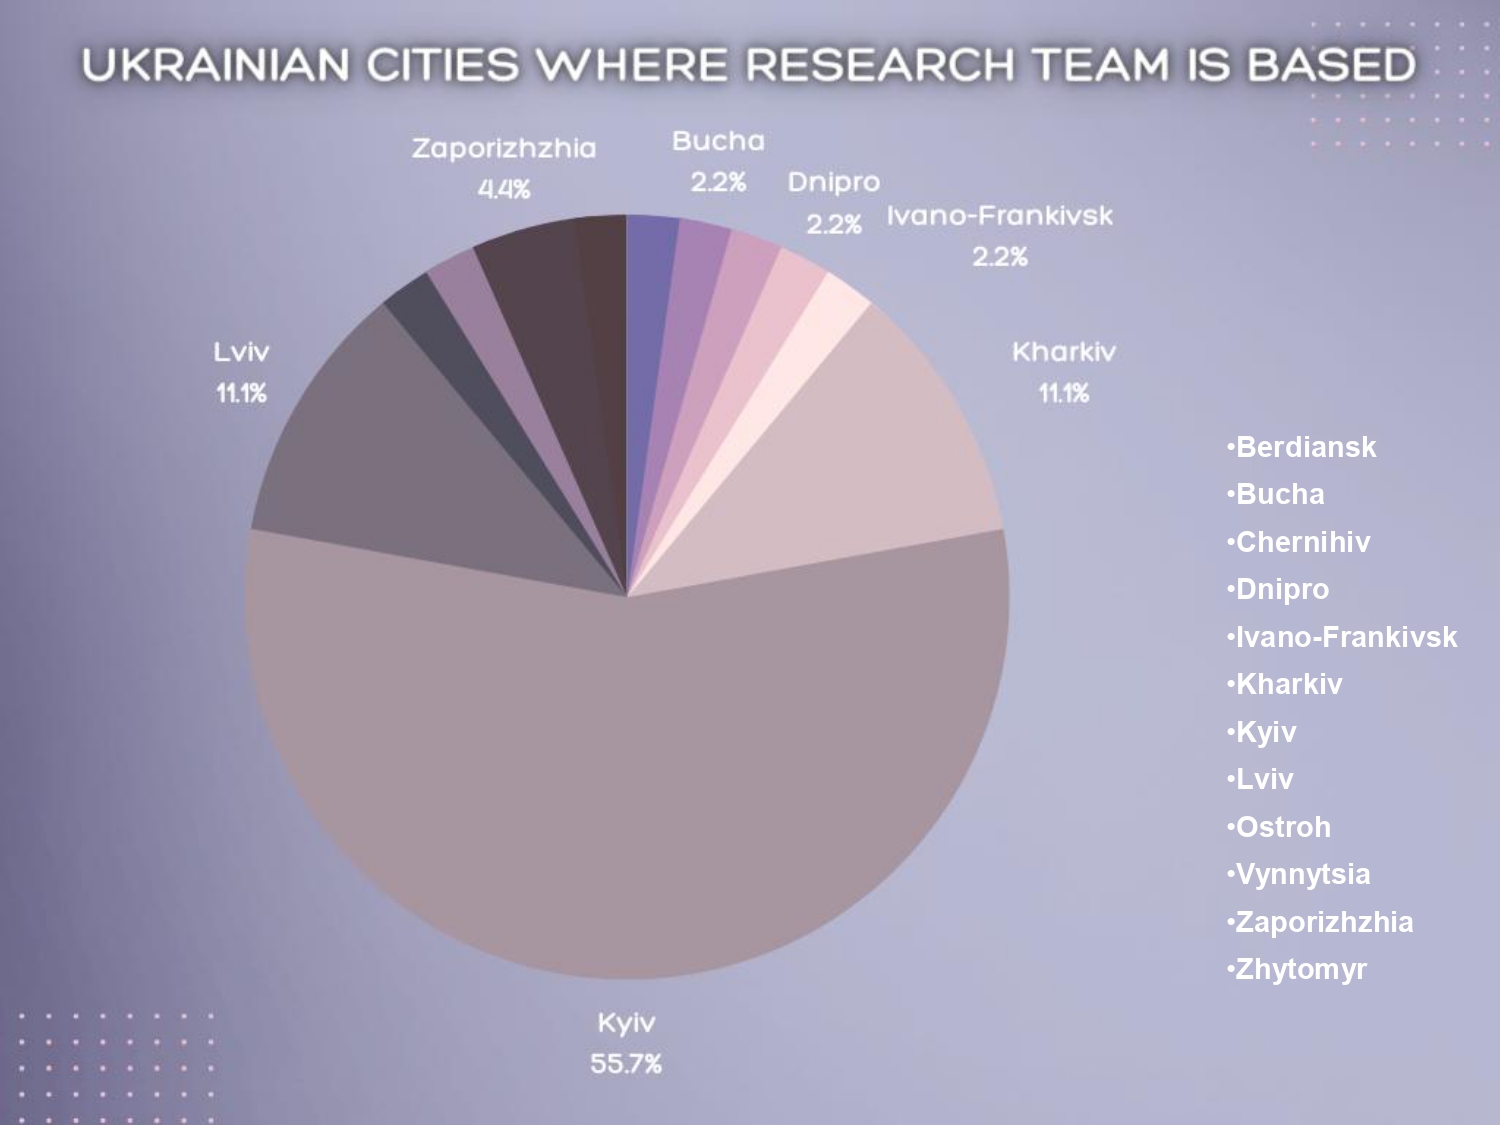 Ukrainian cities where research team is based